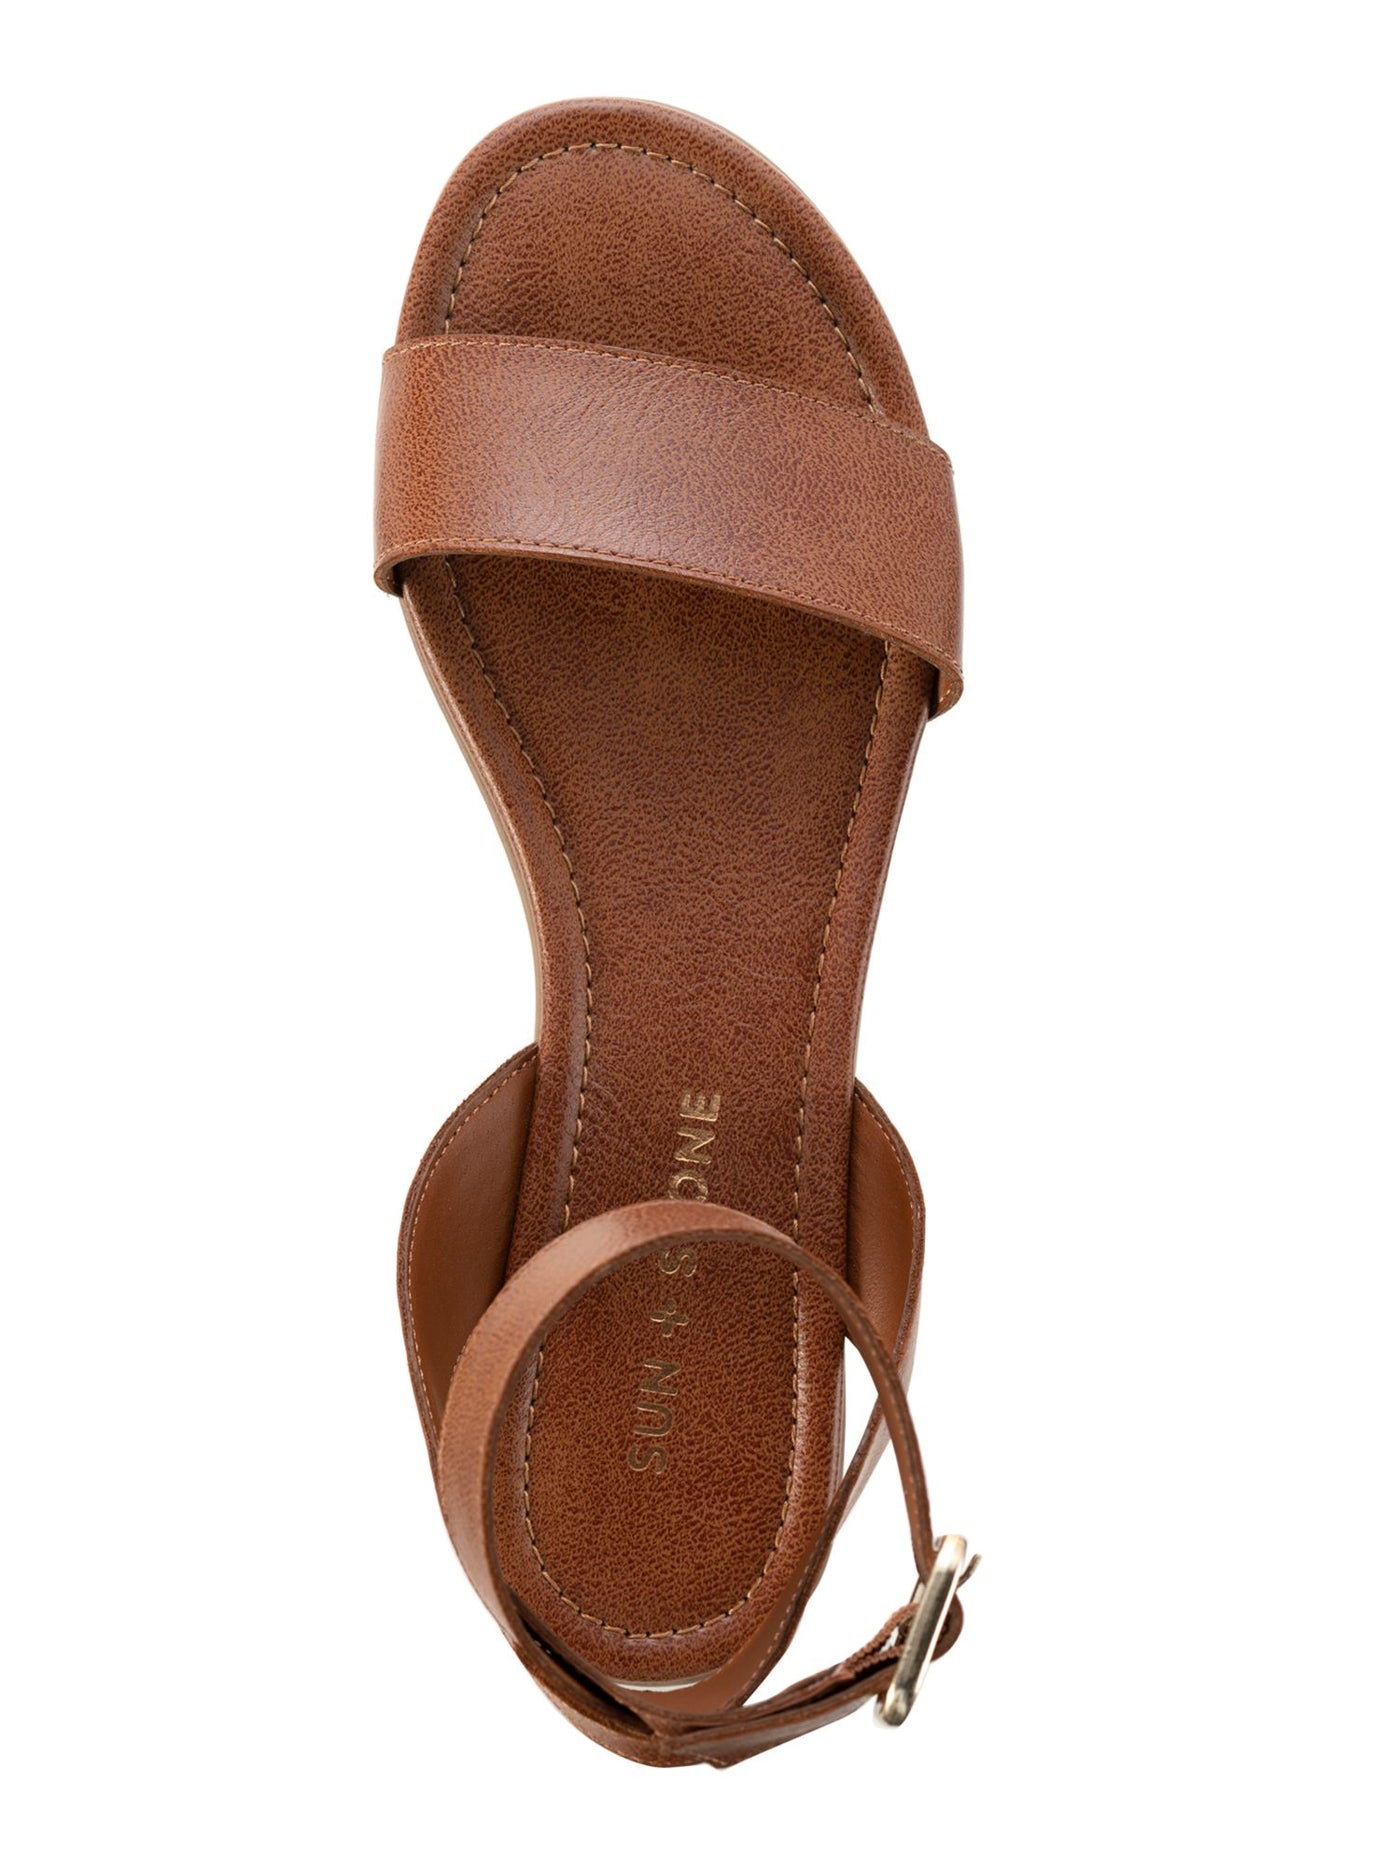 SUN STONE Womens Brown Cushioned Adjustable Strap Ankle Strap Miiah Round Toe Buckle Sandals Shoes 10 M